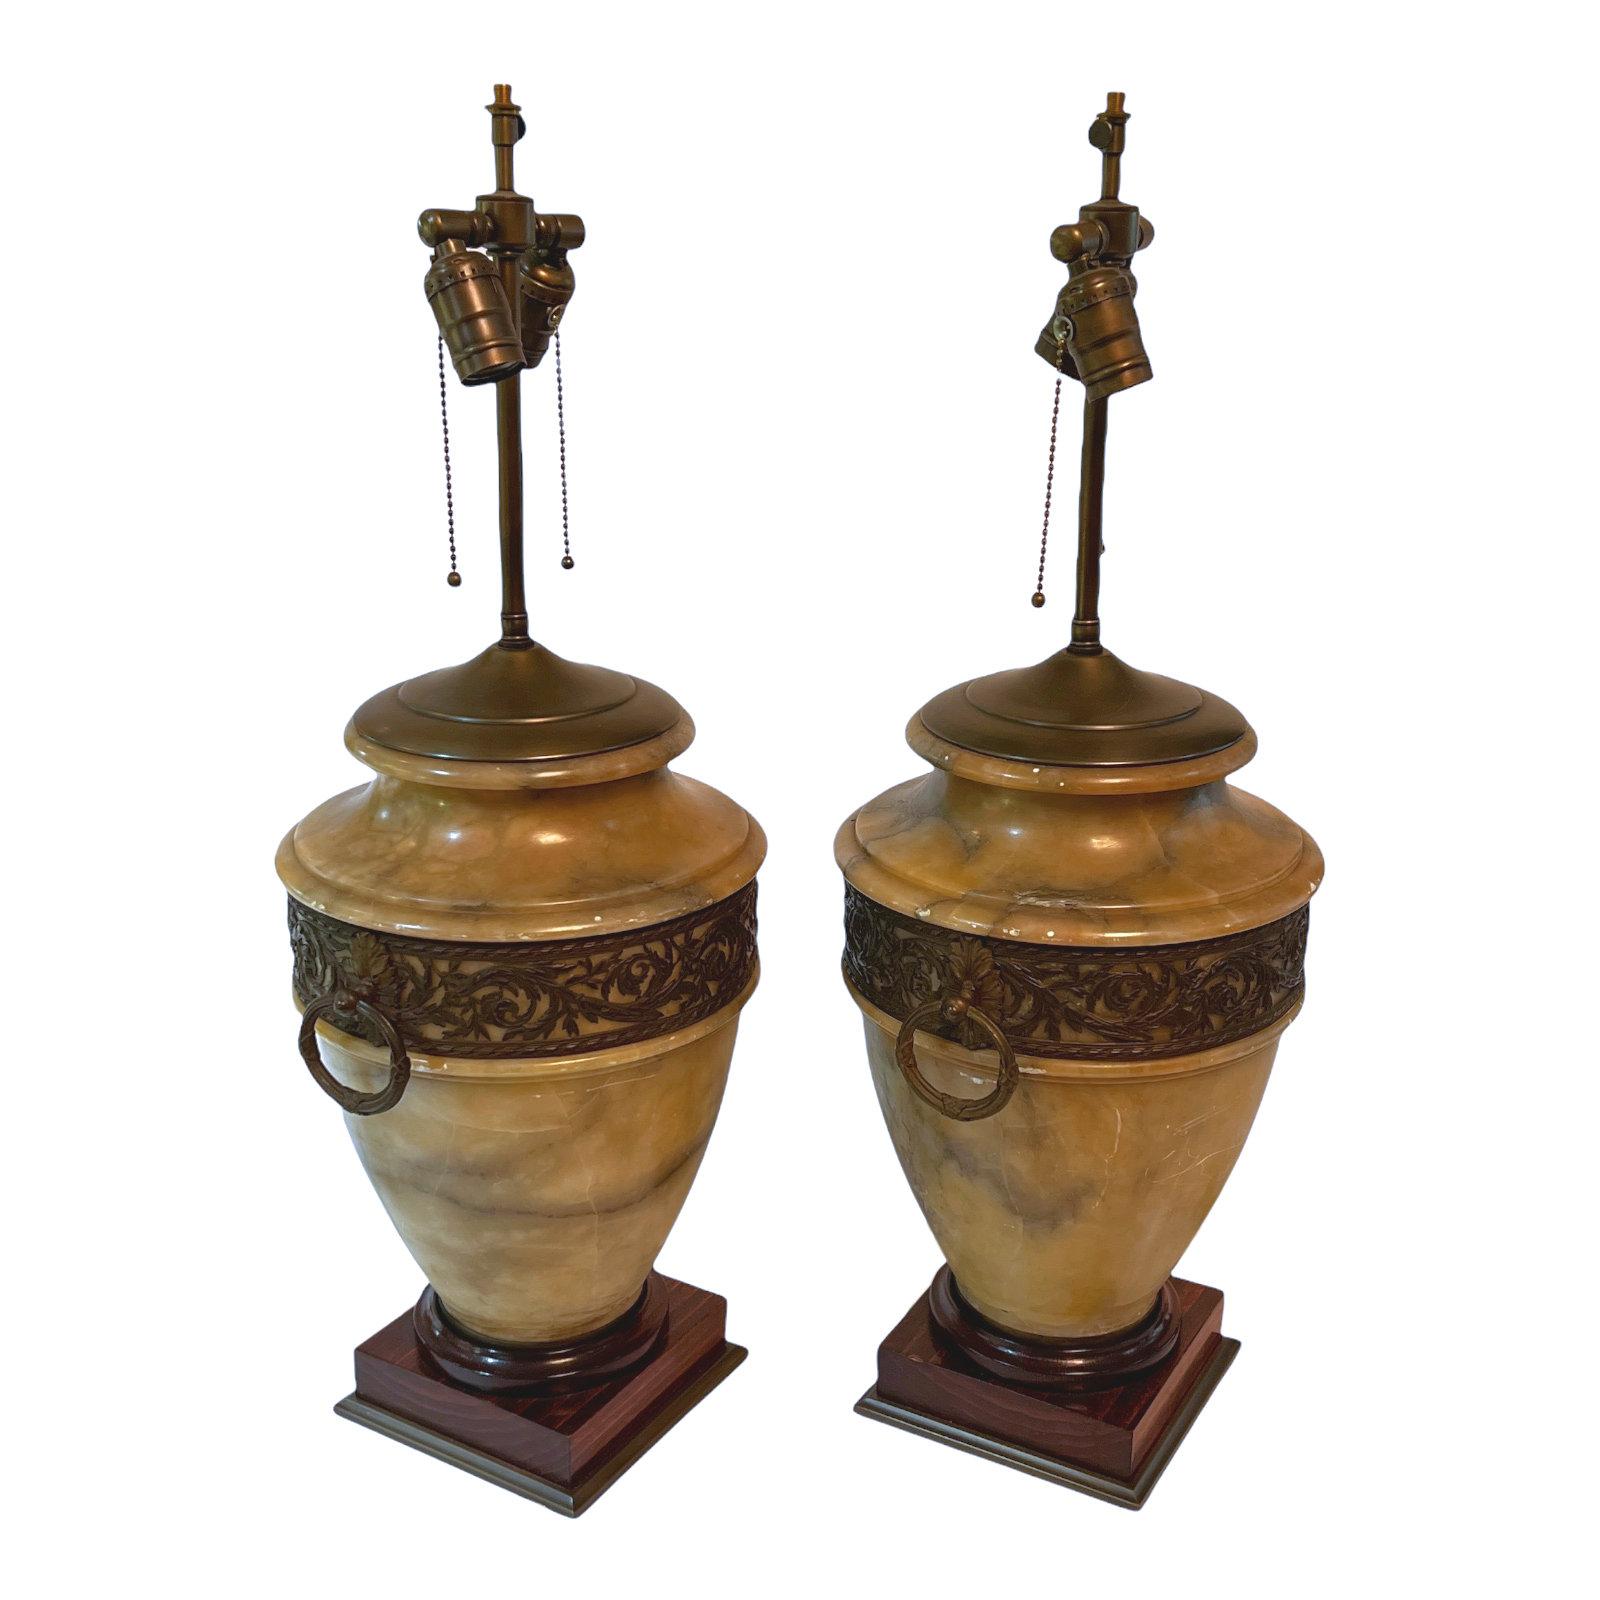 Our pair of table lamps in the neoclassical style have urn forms cut from alabaster stone with brown patinated metal inserts at the shoulder featuring scrolling foliage and ring shaped handles, set upon mahogany pedestals. With sockets and wiring,